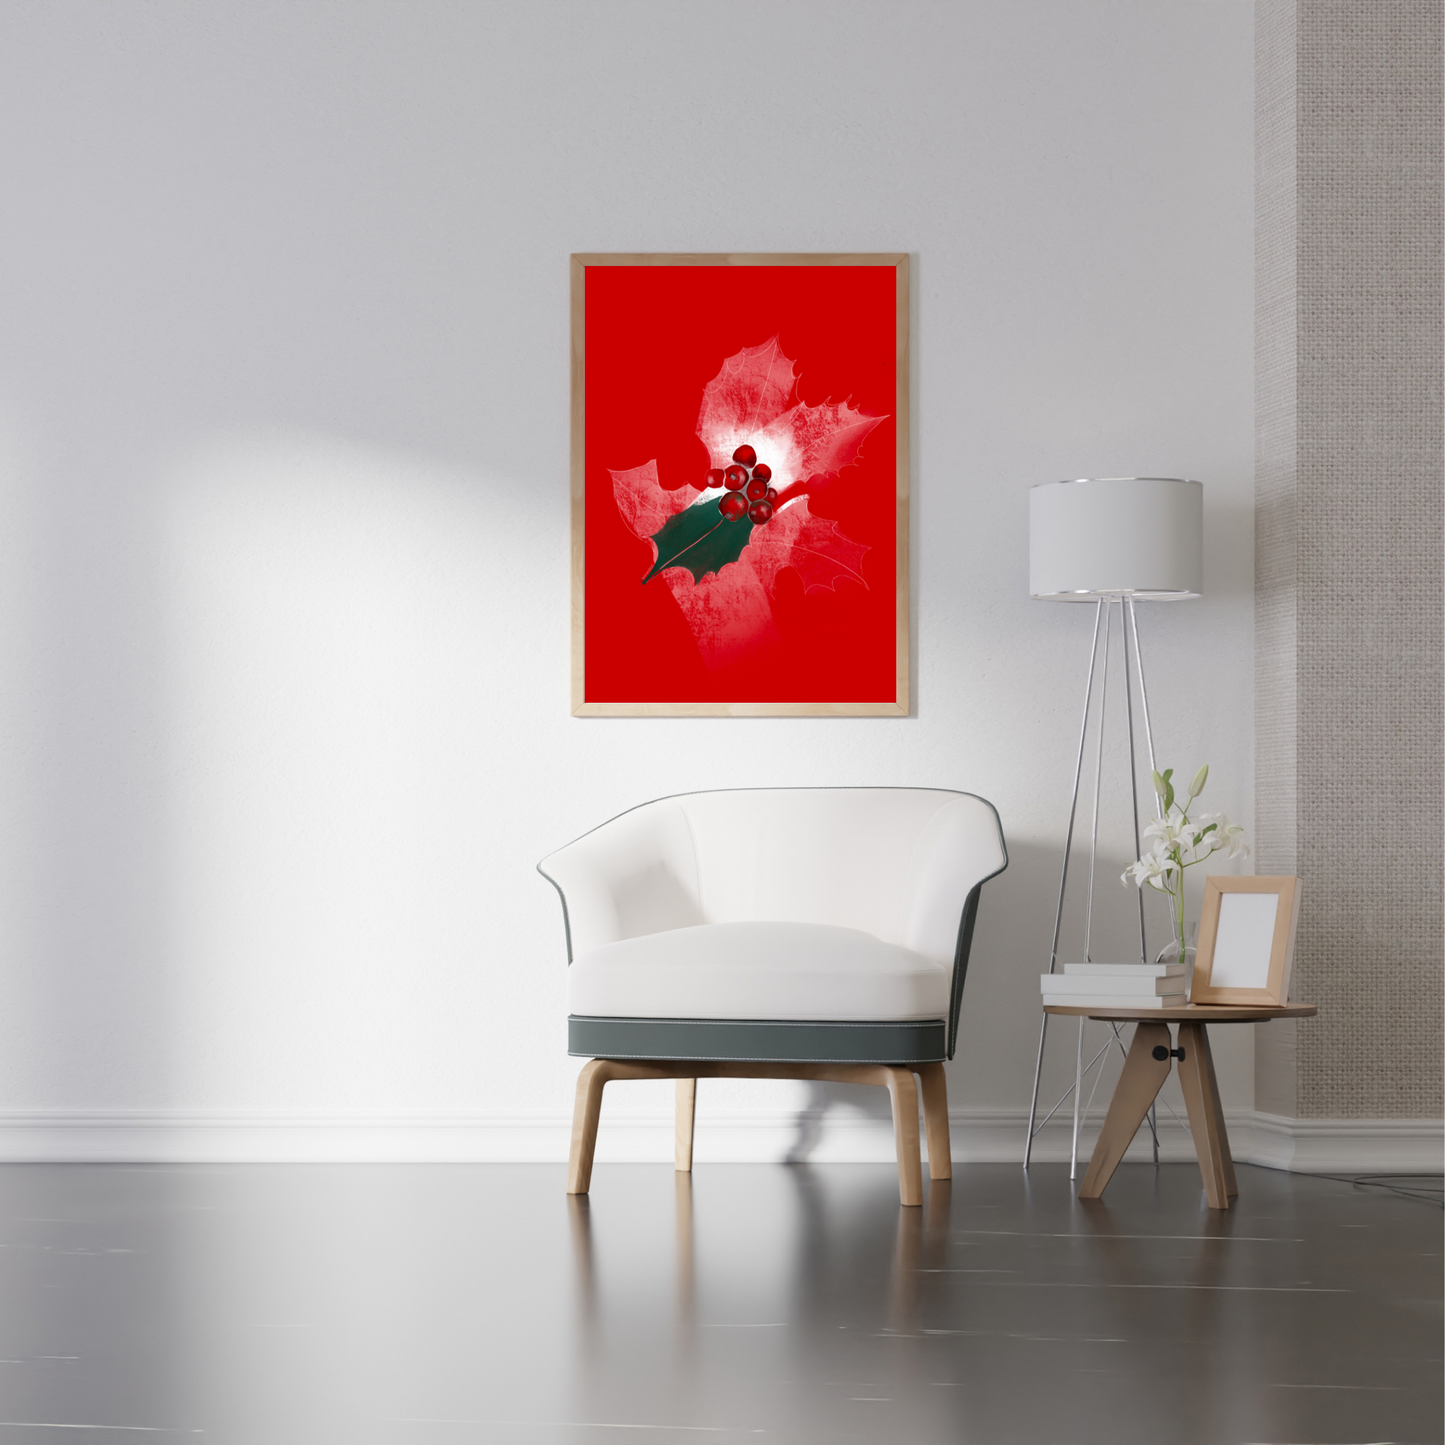 An example of the Holly painting by ArisaTeam in a living room